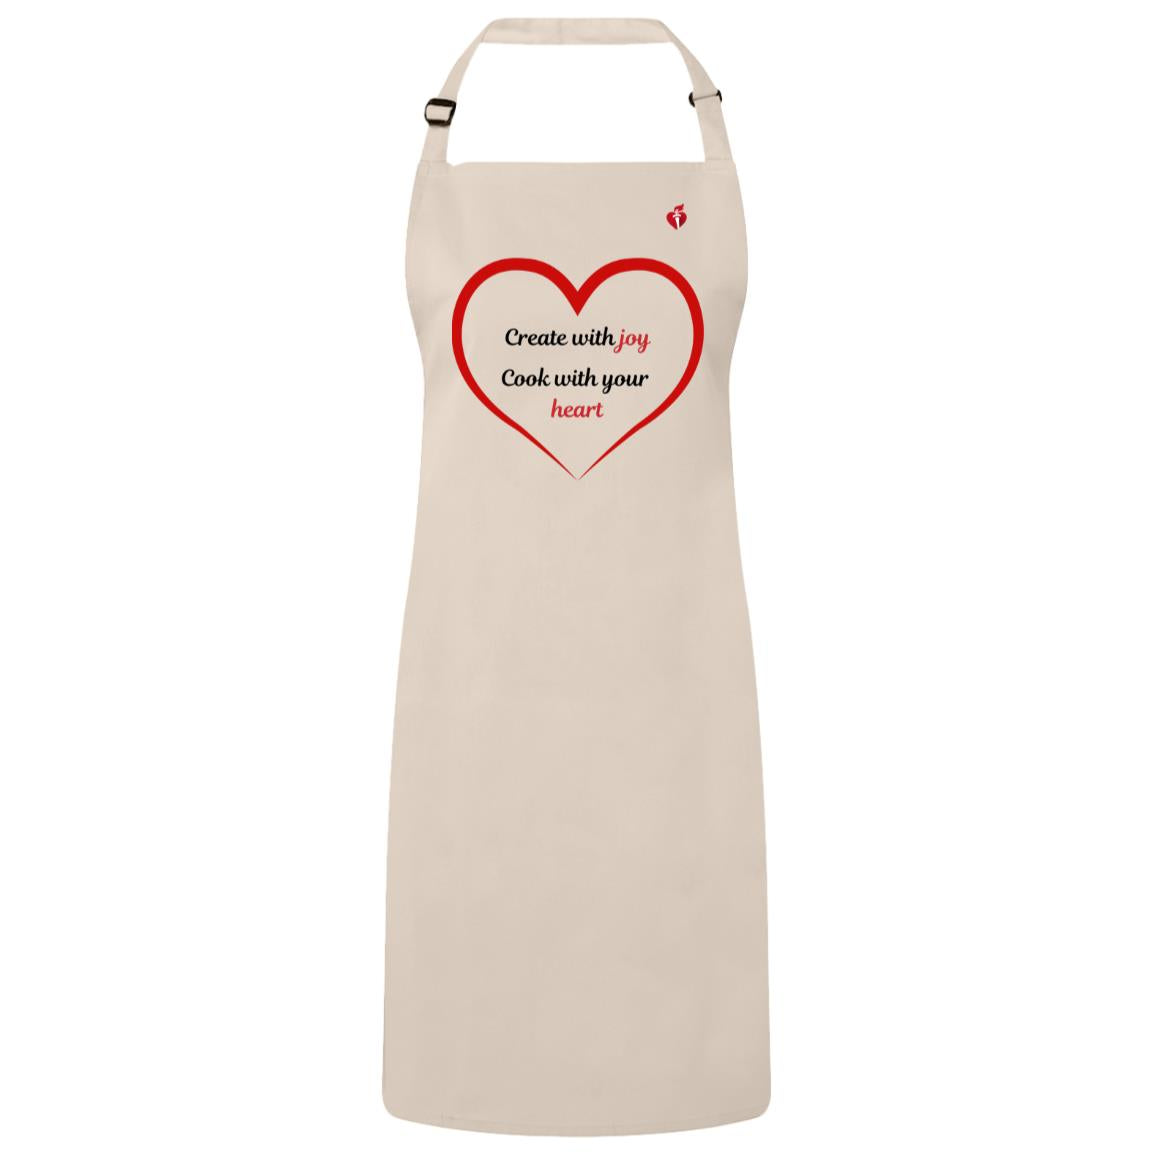 Natural color apron with adjustable buckle neck, aha heart and torch logo on left chest, a red heart outline with words inside that say: "Create with joy. Cook with your heart."